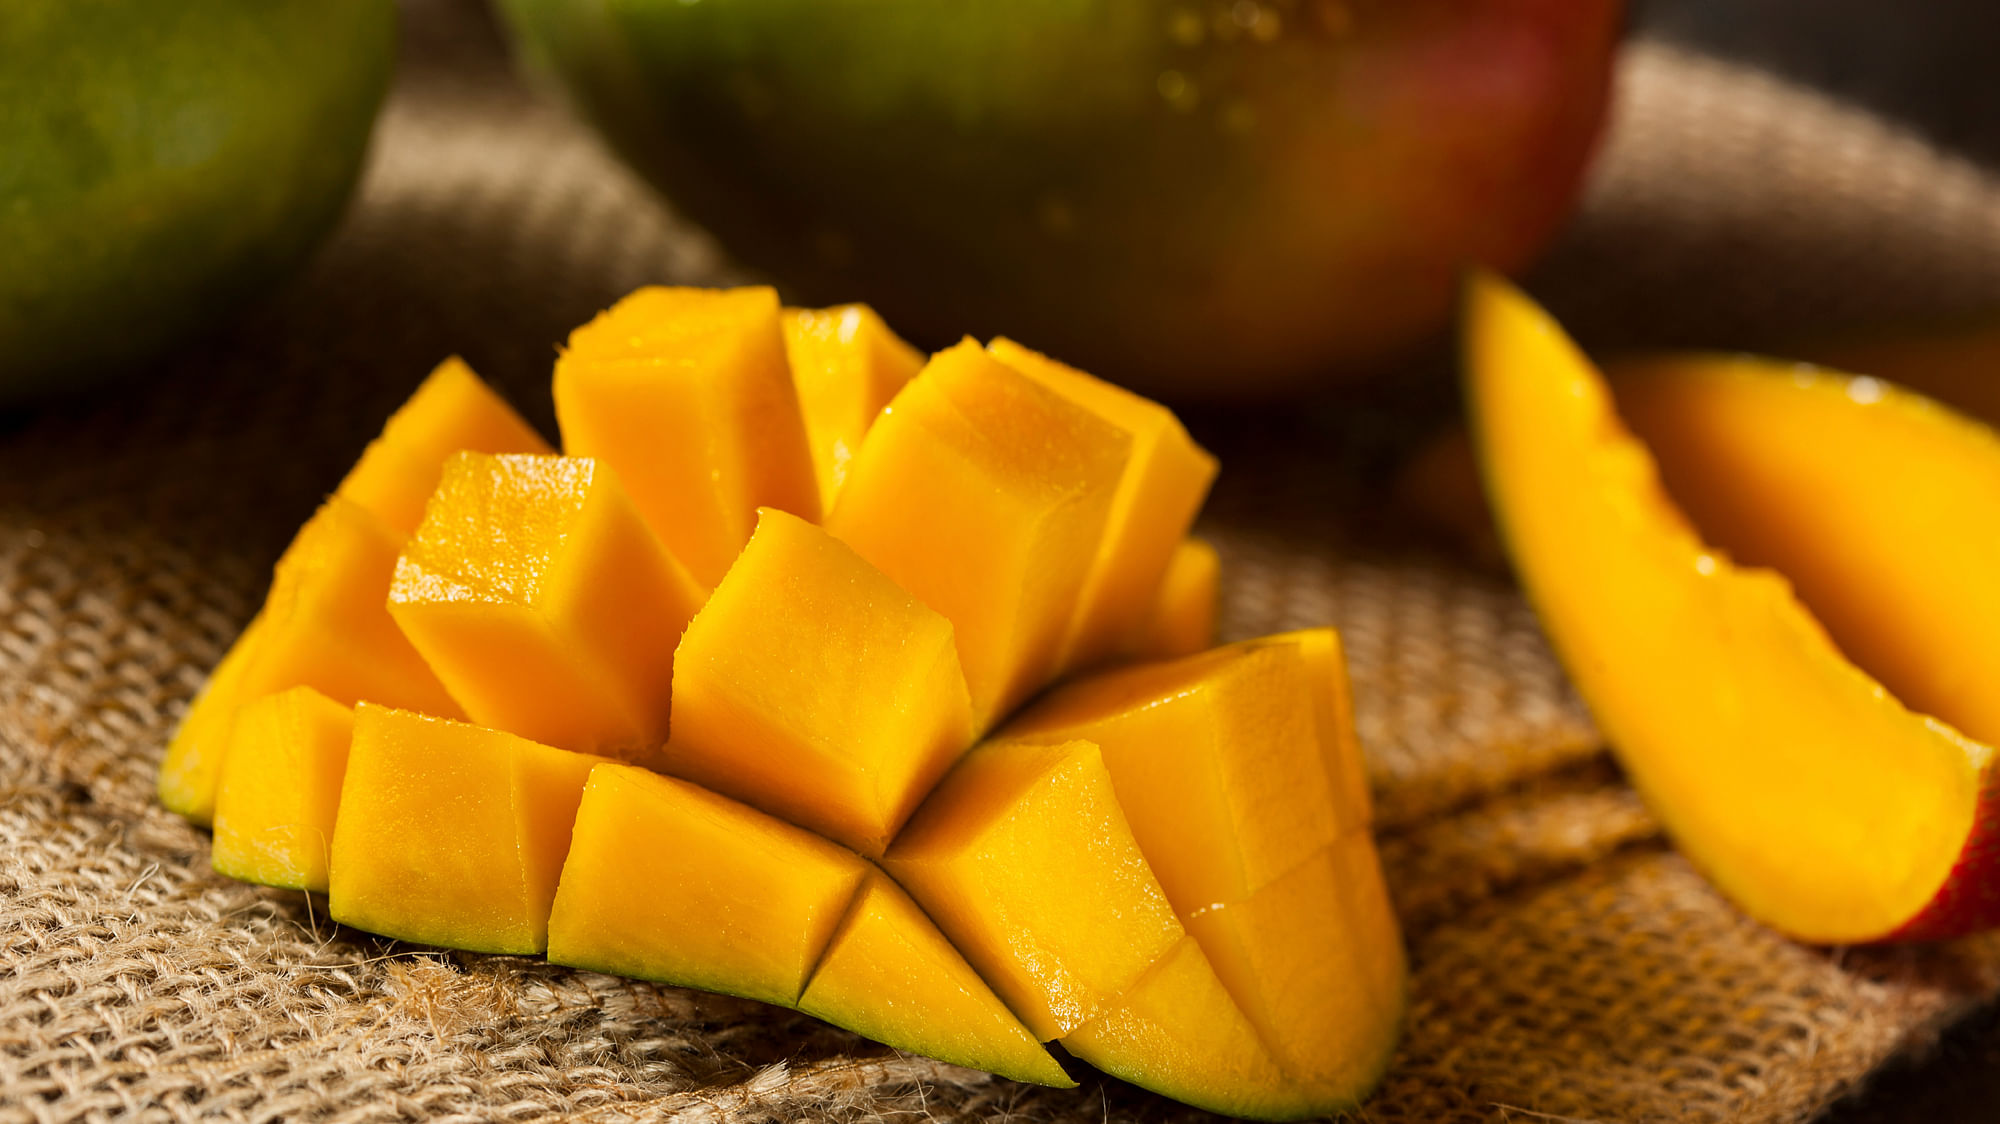 Everyone’s favourite mango  is back to enthrall. (Photo: iStockphoto.com)